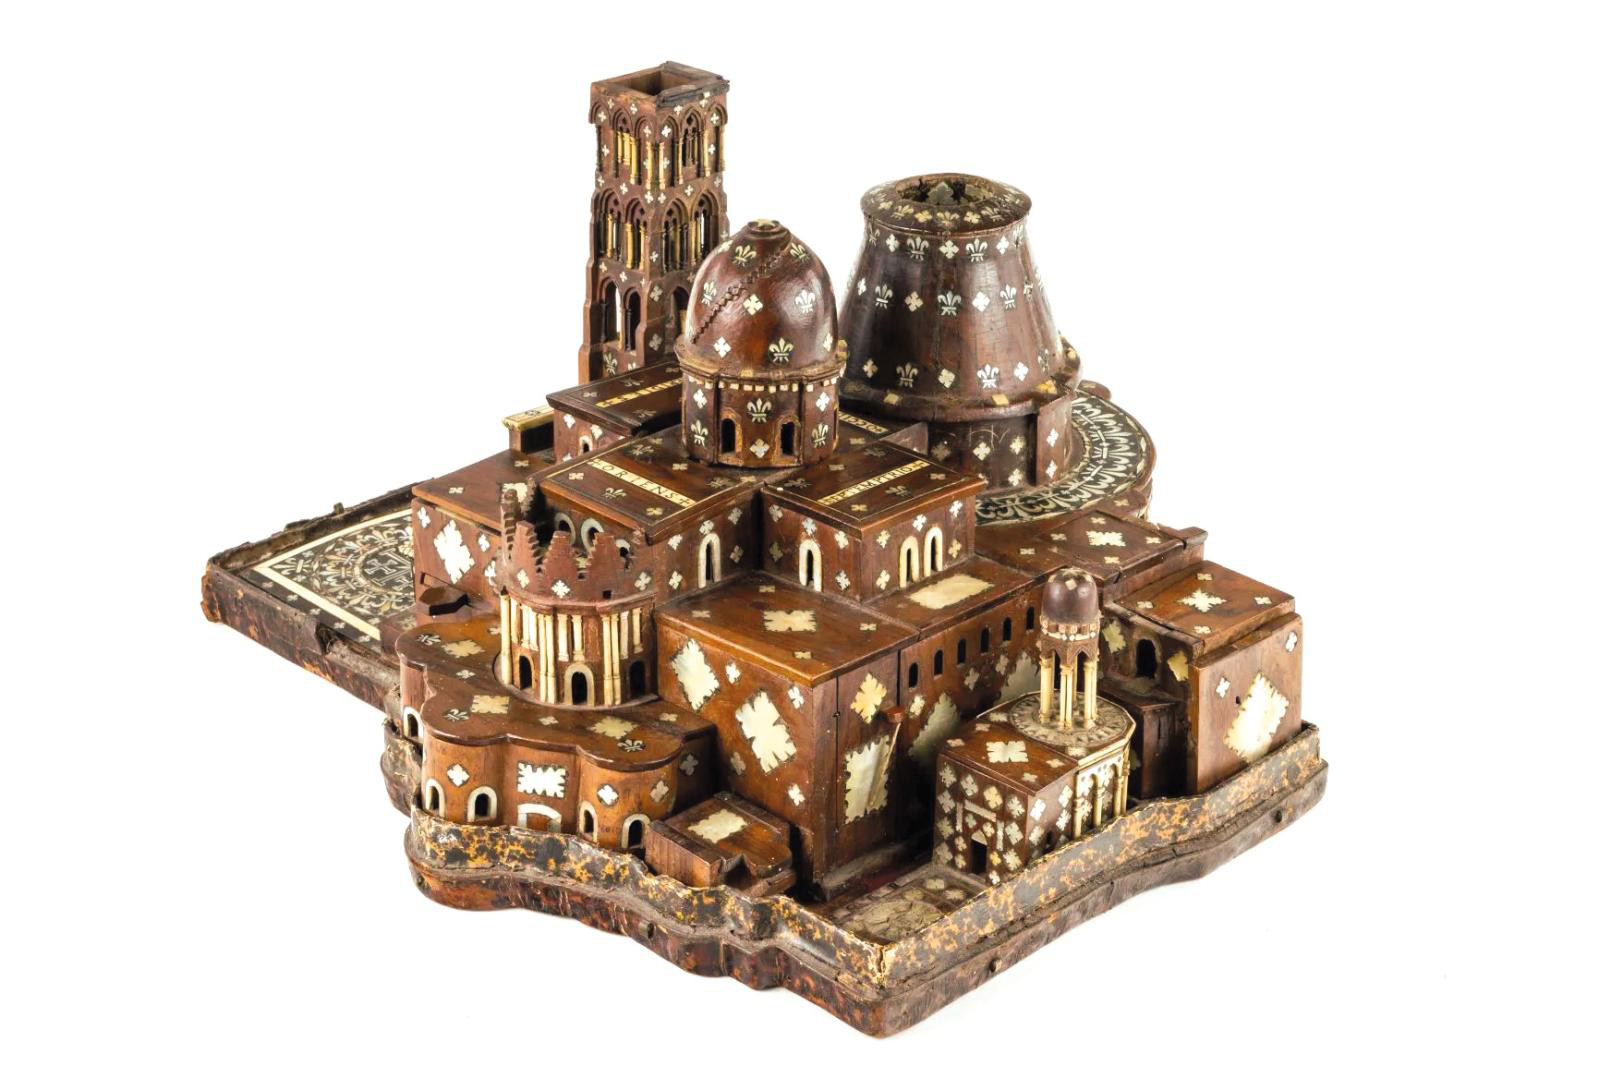 A Precious Model of the Holy Sepulcher for the Louvre